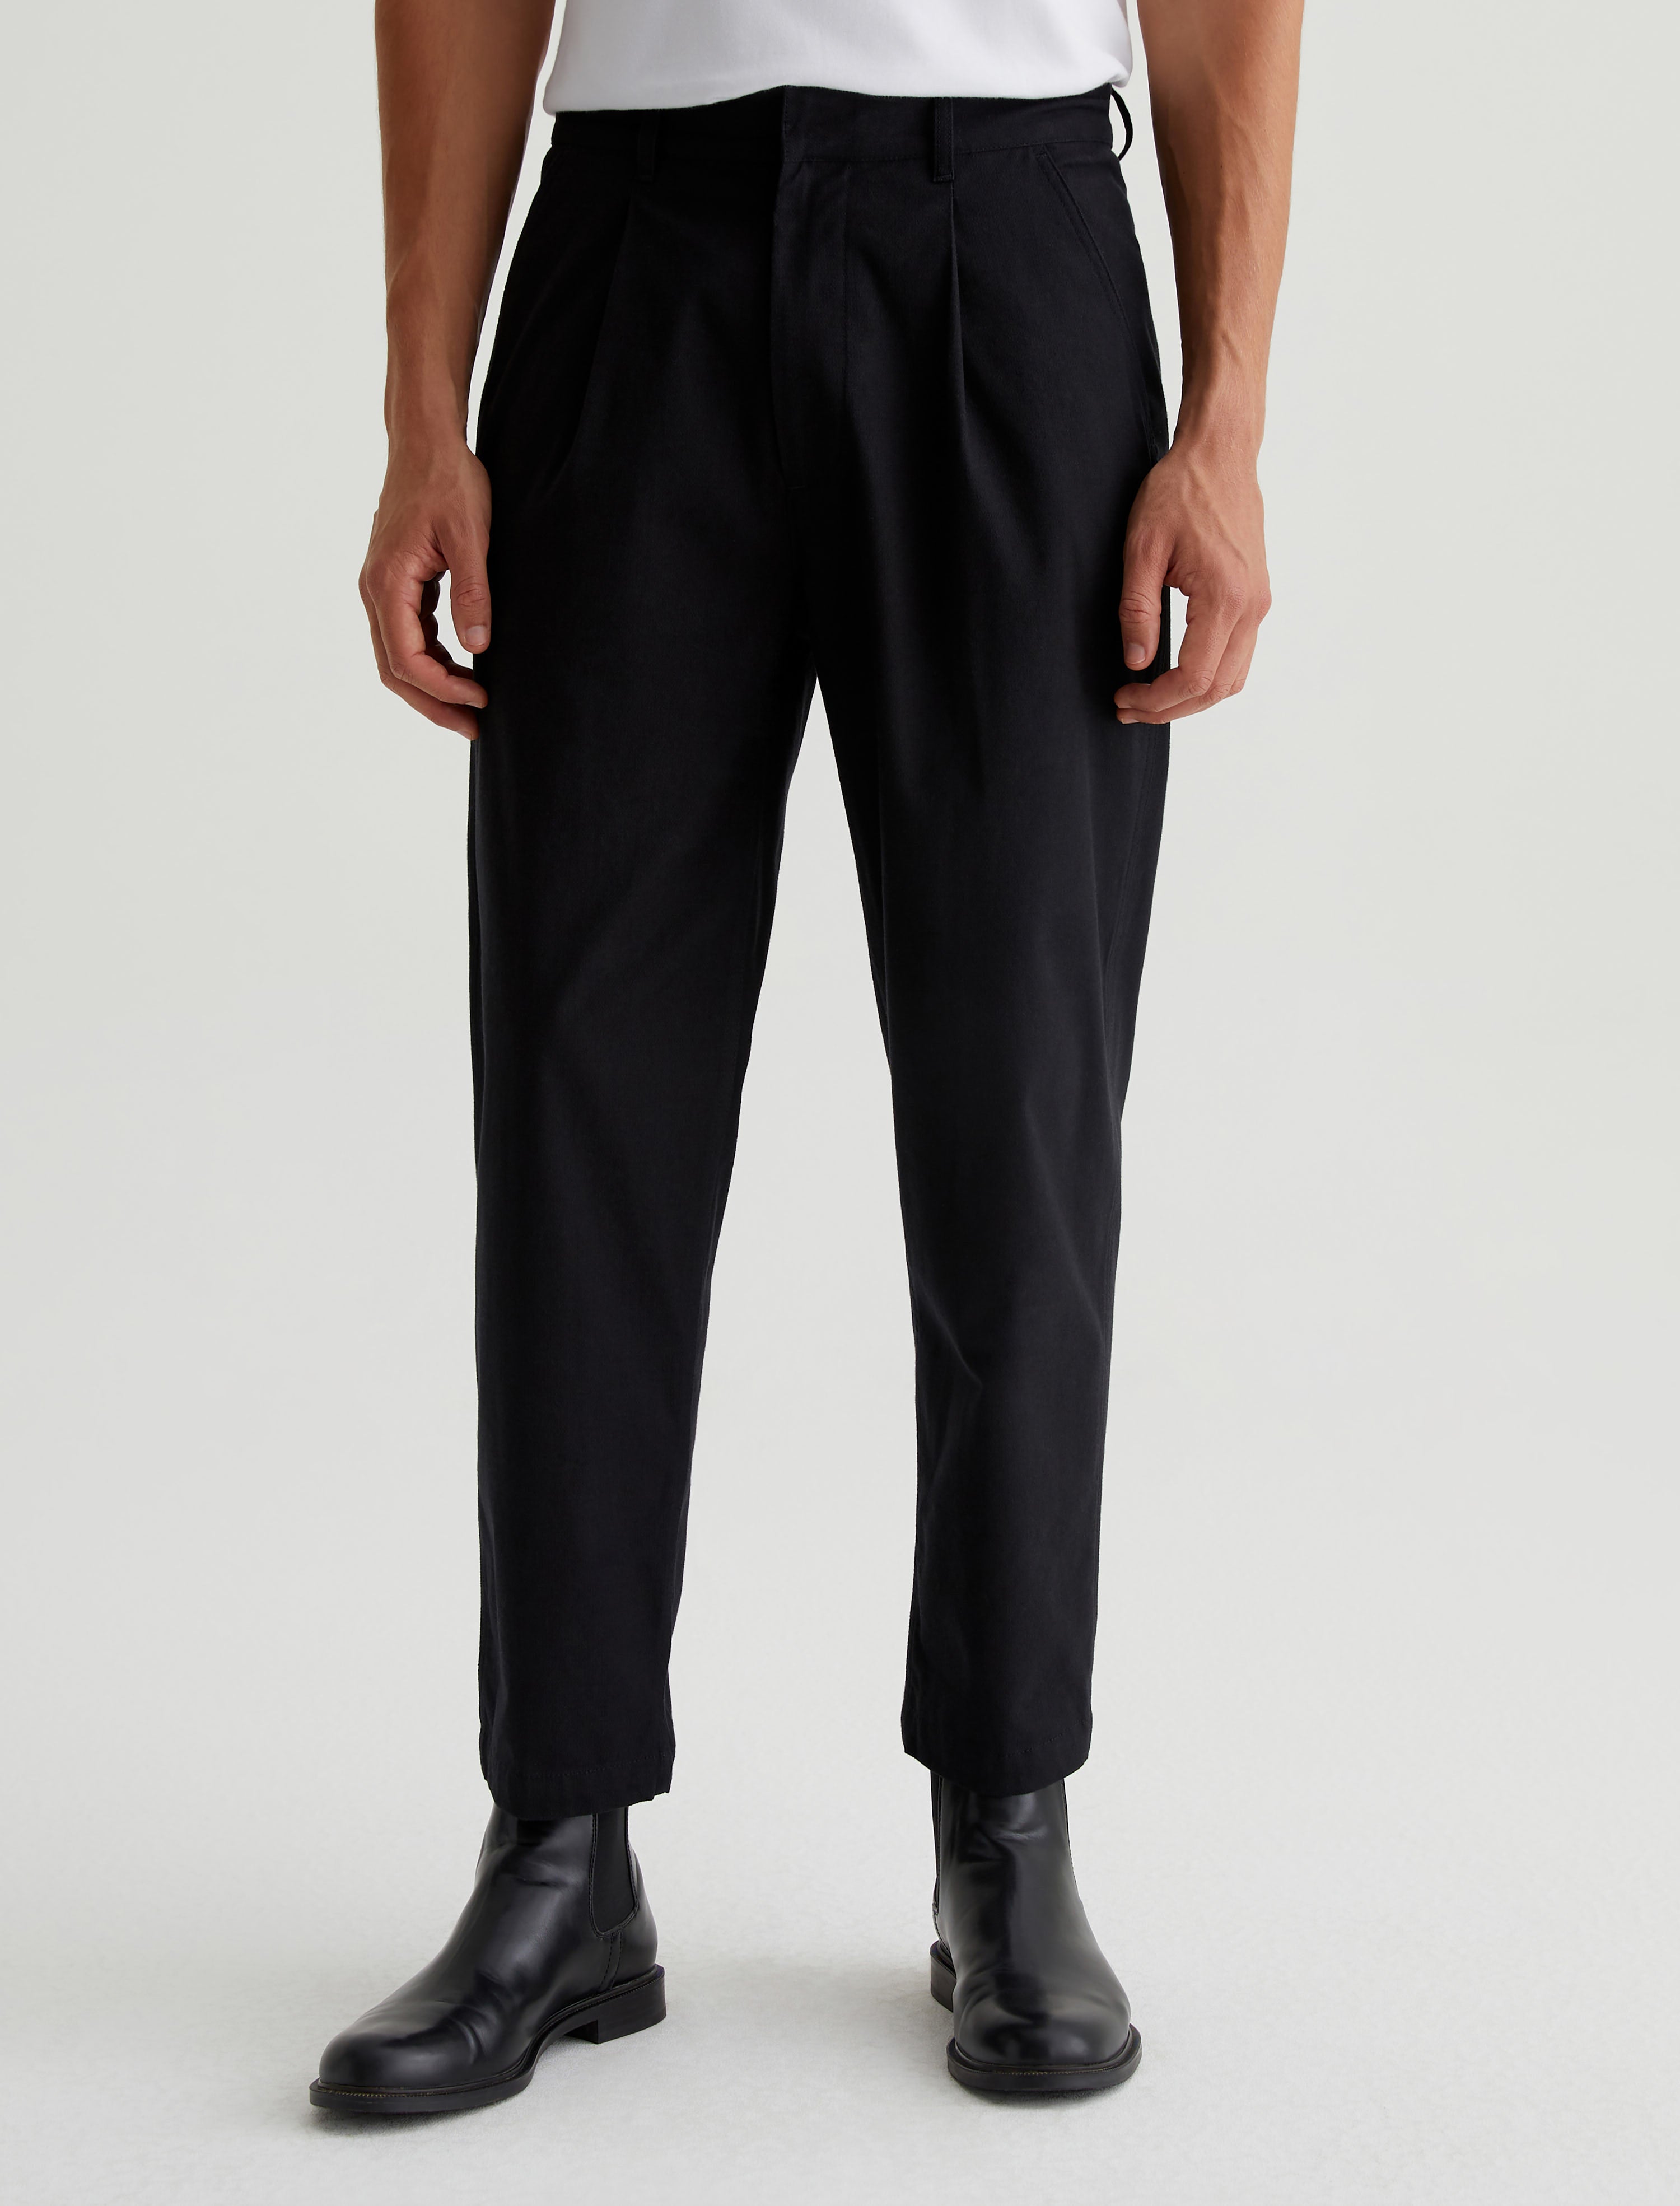 DAVID CATALAN PLEATED TROUSERS - Relaxed fit jeans - black - Zalando.co.uk